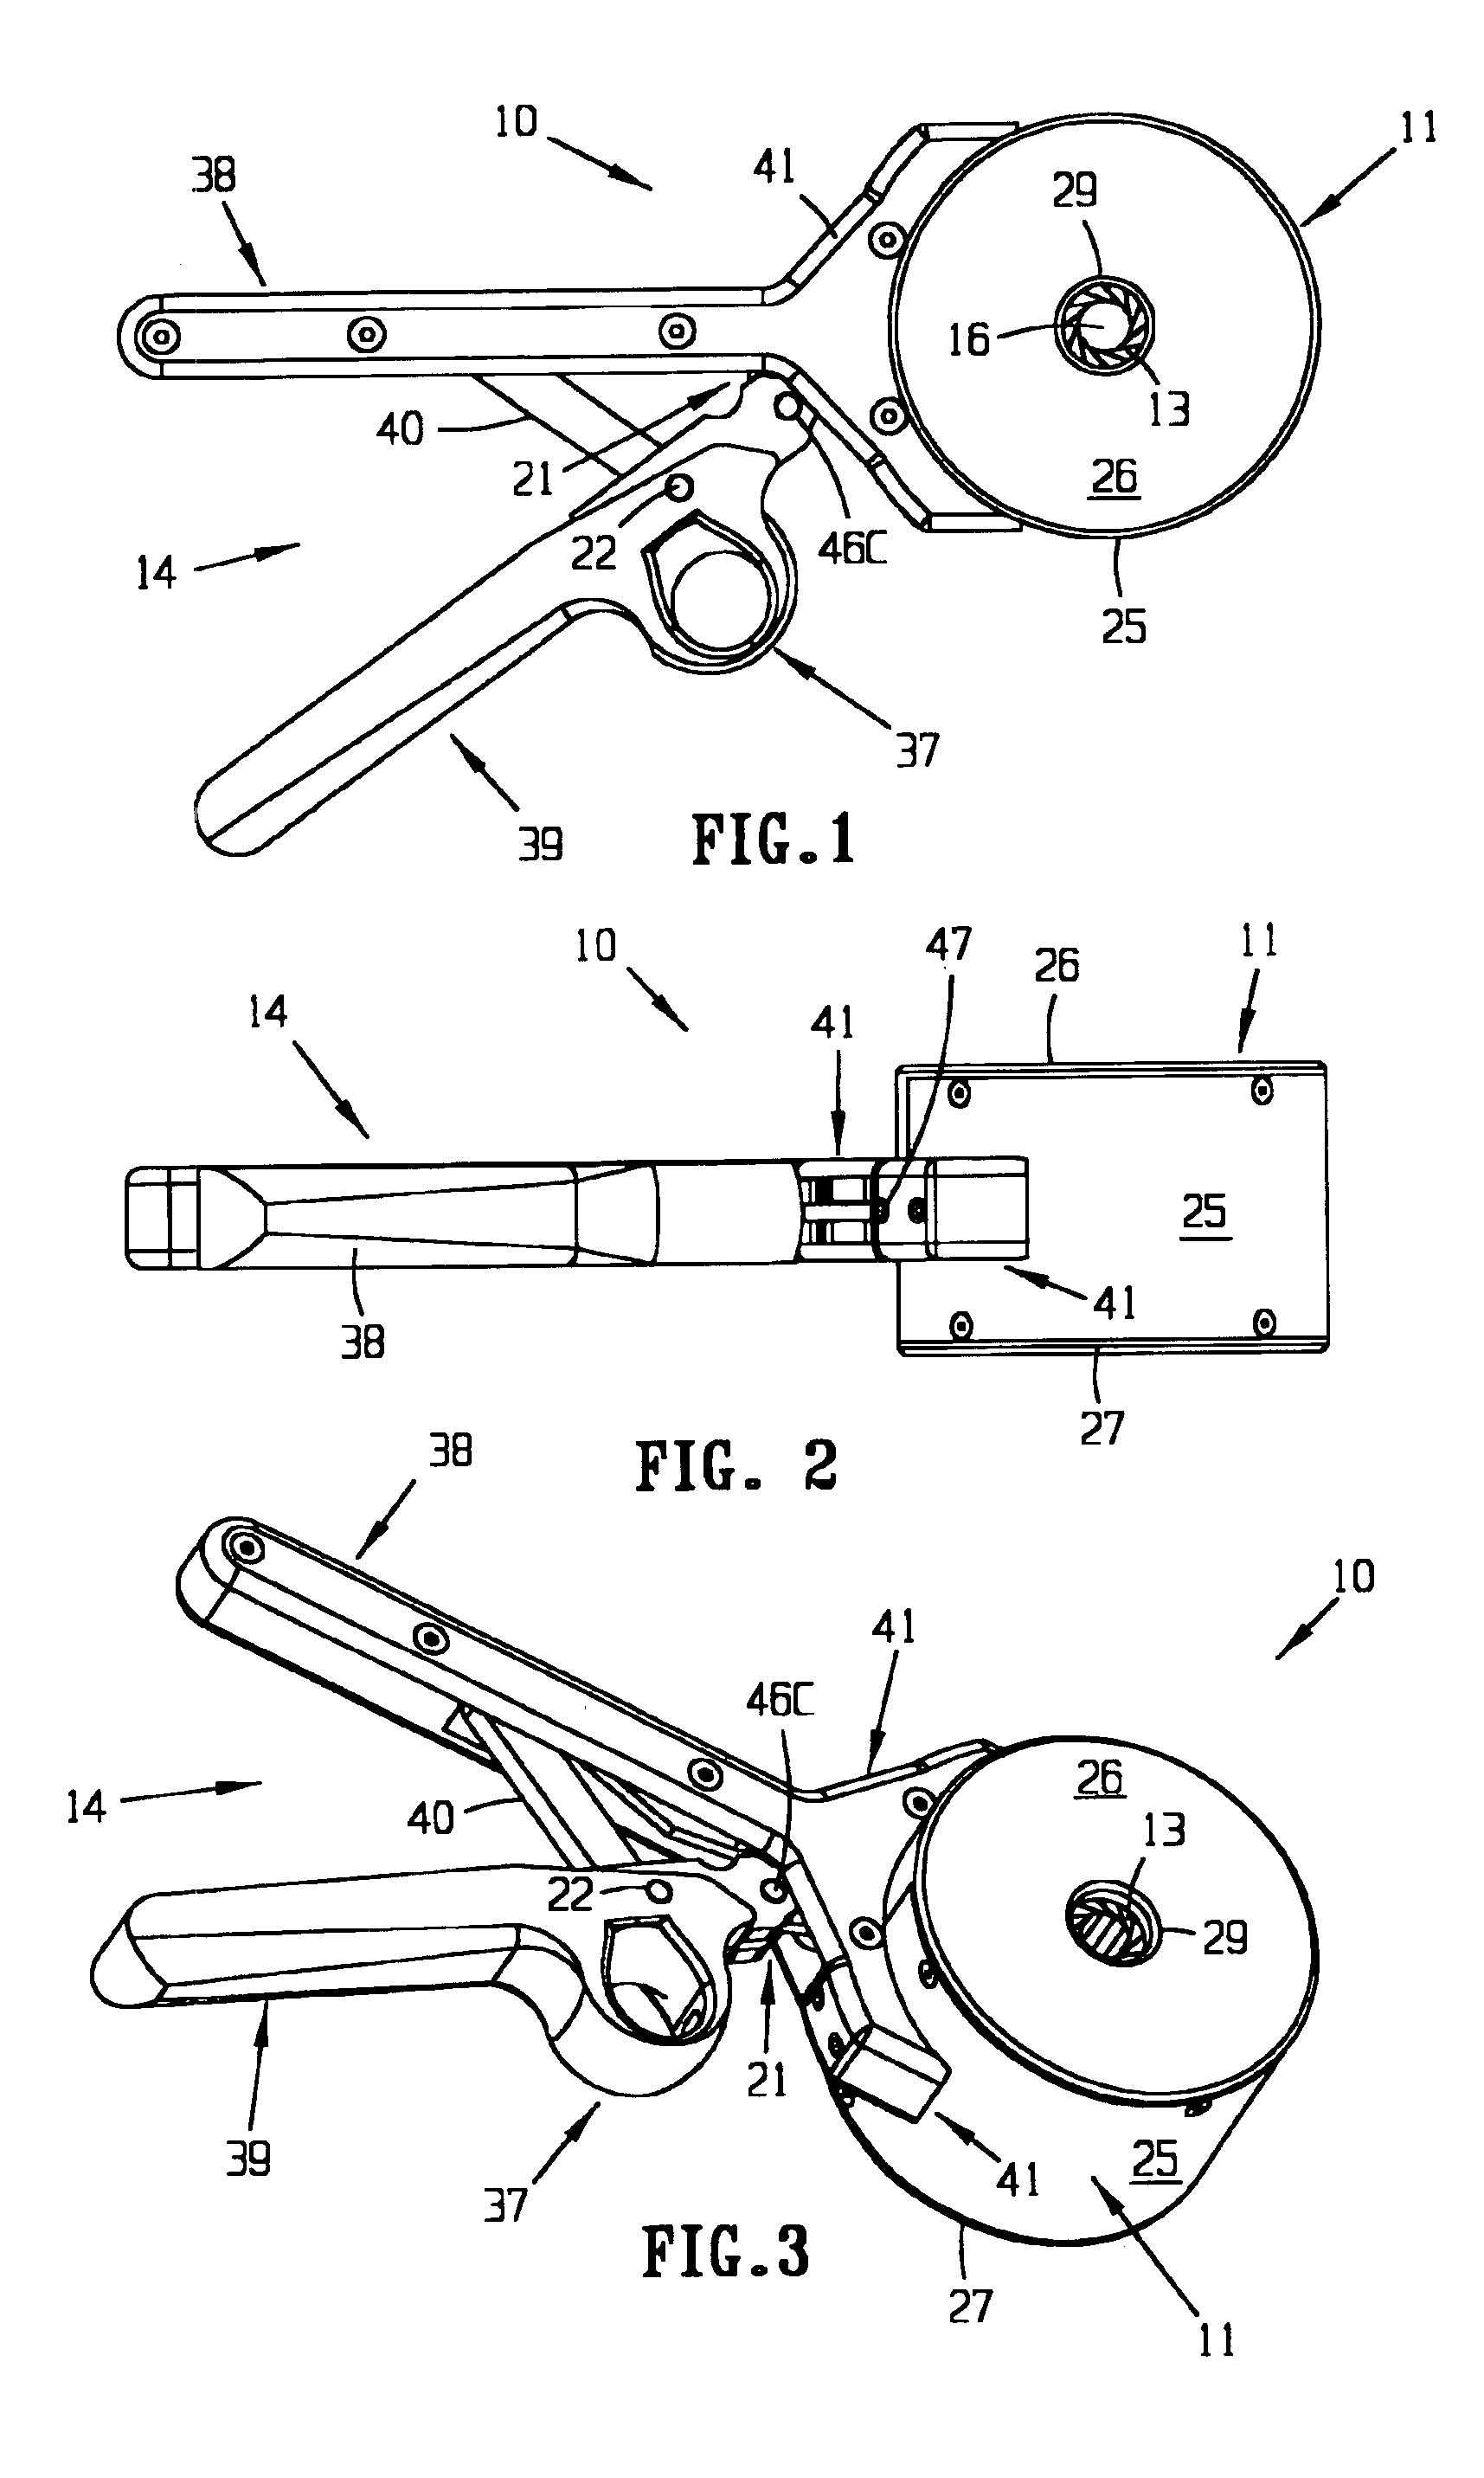 Hand held stent crimping apparatus and method